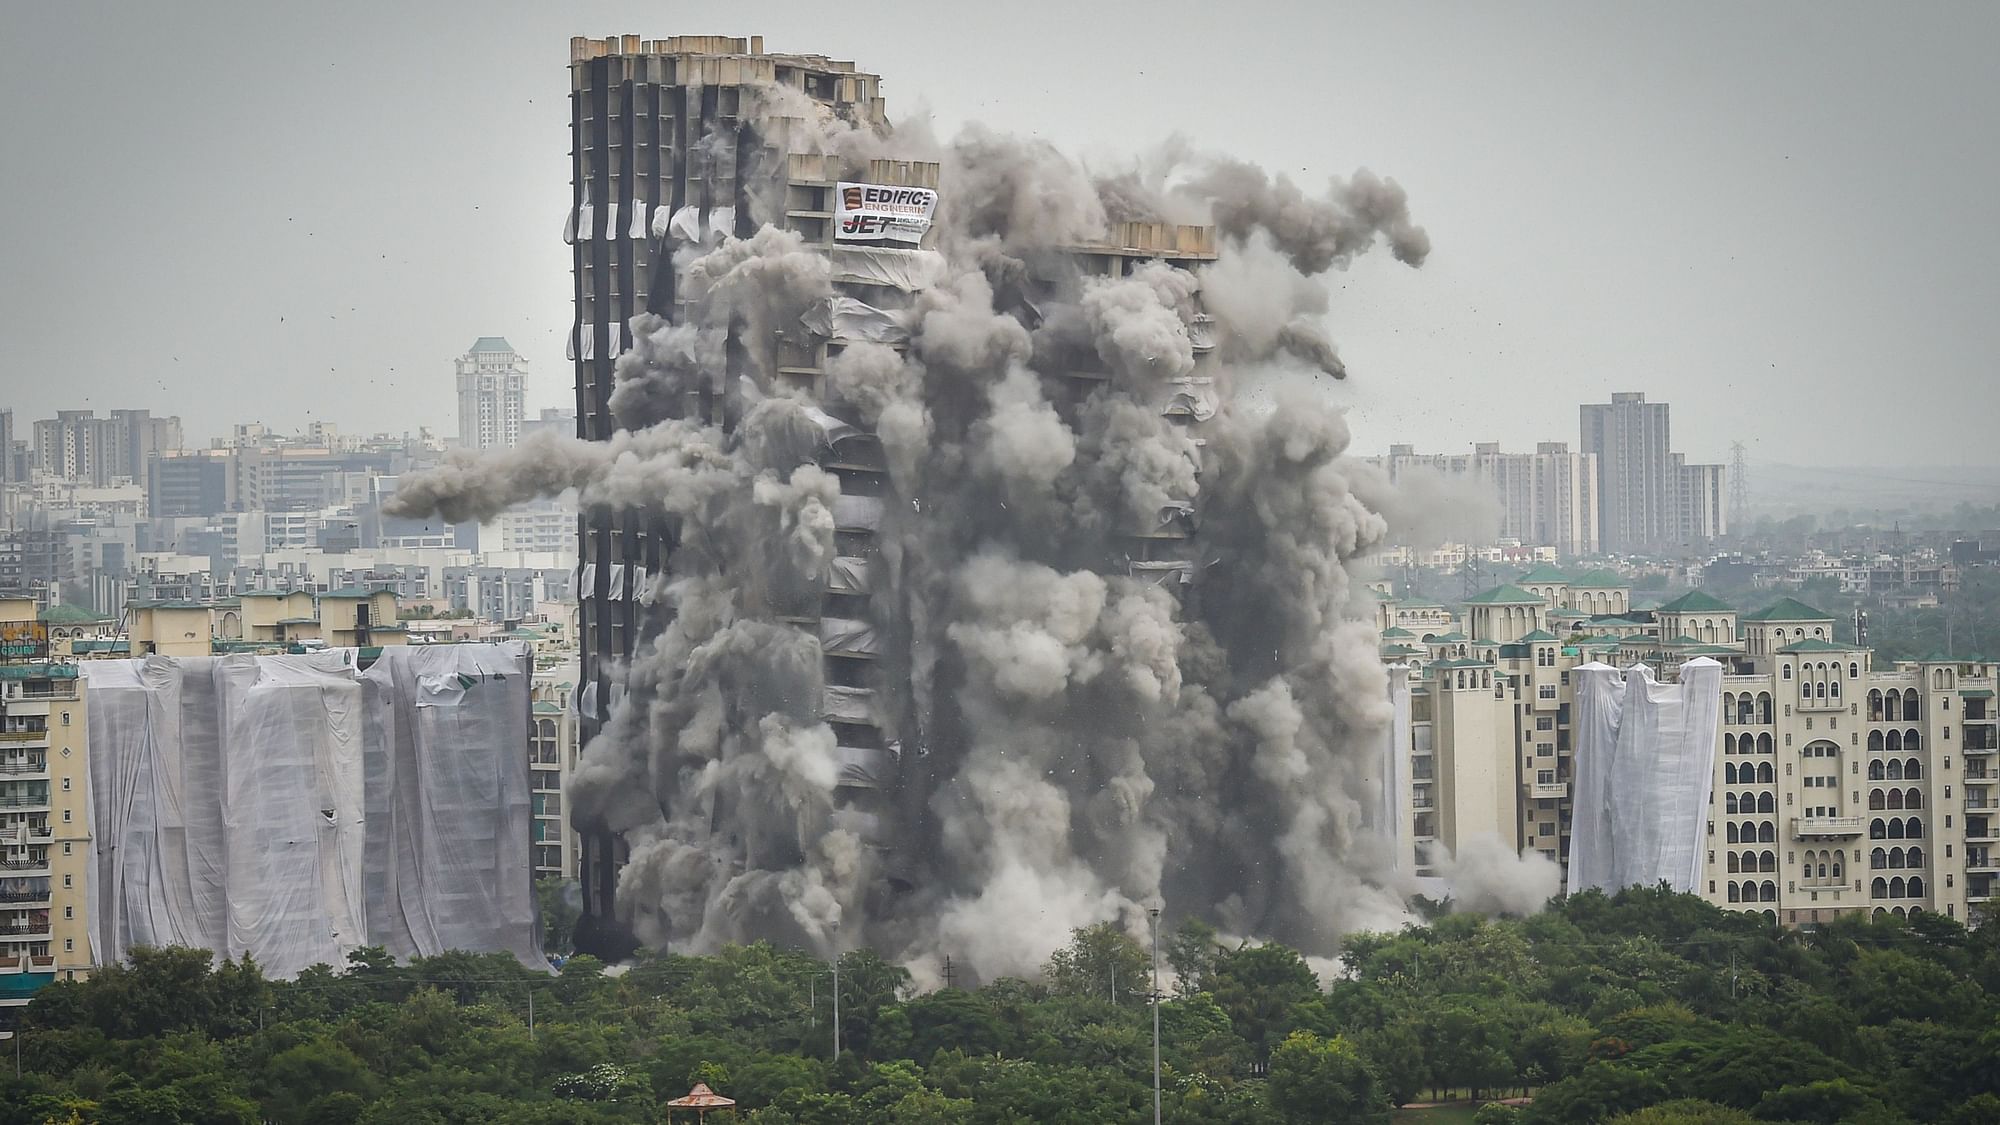 <div class="paragraphs"><p>The <a href="https://www.thequint.com/topic/supertech-twin-towers">demolition</a> was conducted at 2.30 pm on Sunday in pursuance of a <a href="https://www.thequint.com/topic/supreme-court">Supreme Court</a> order.</p></div>